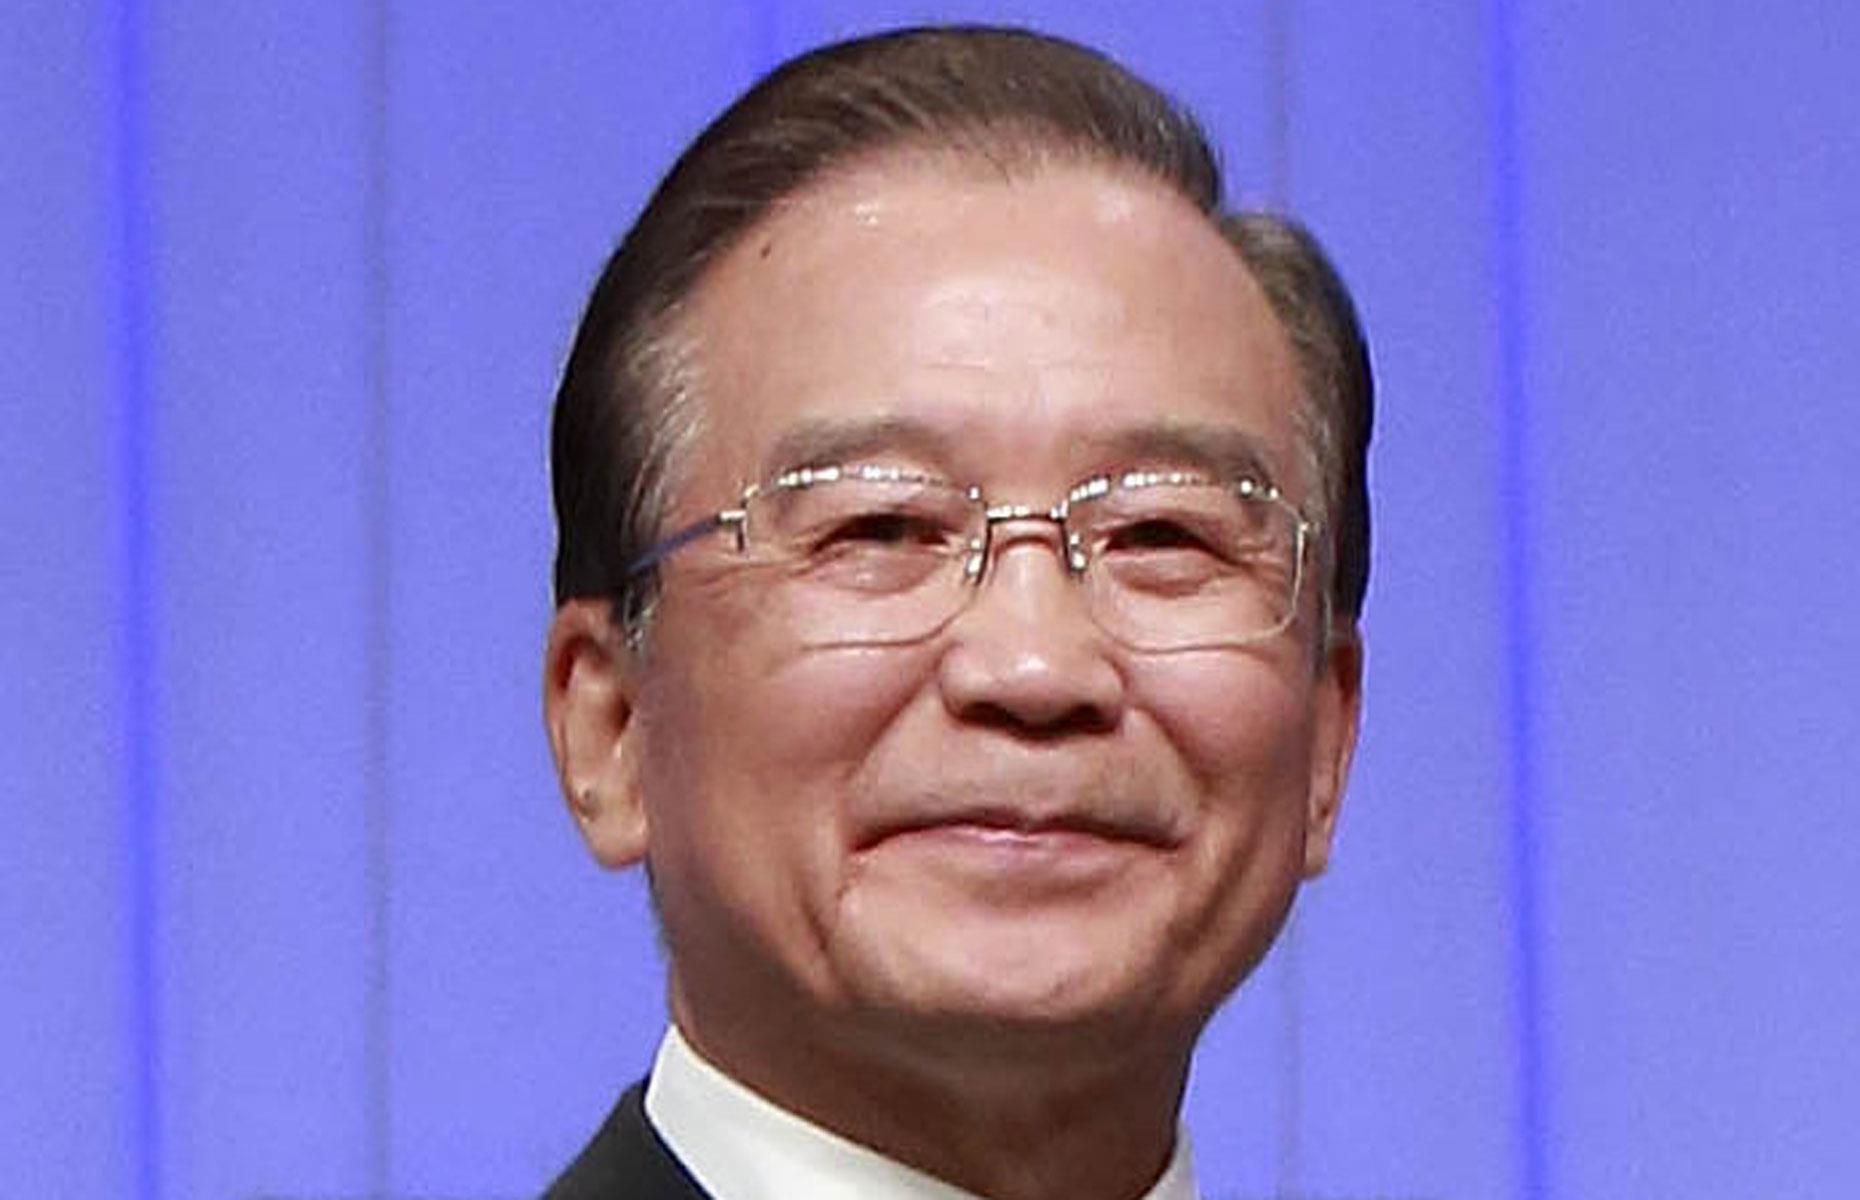 <p>China's premier from 2003 to 2013, Wen Jiabao managed to stockpile billions during his 10-year term. A comprehensive review of company and regulatory filings published in the <em>New York Times</em> in 2012 revealed the Communist Party of China chief had garnered assets amounting to $2.7 billion.</p>